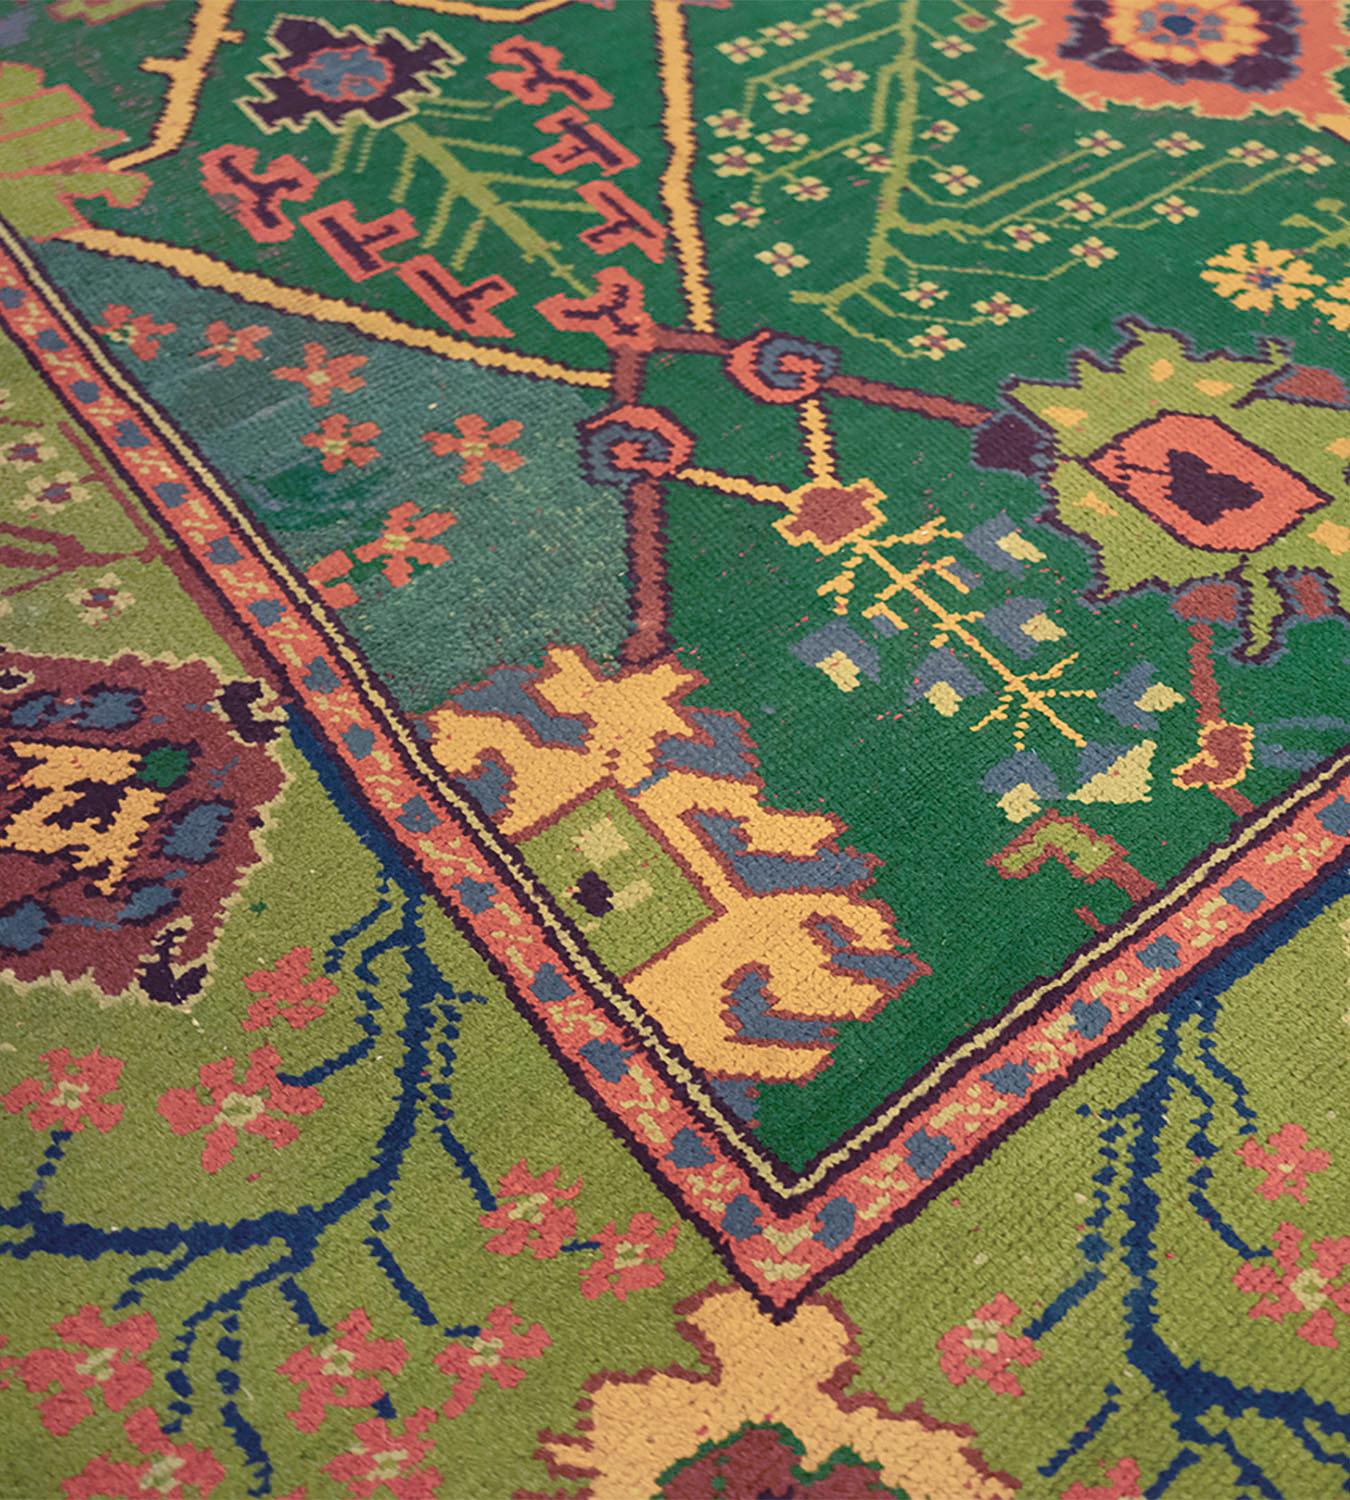 This traditional hand-woven Irish Donegal rug has a shaded bottle-green field with a counterposed design of angular vines issuing palmettes and open palmettes enclosing multiple flowering plants, in a light green border of delicate radiating